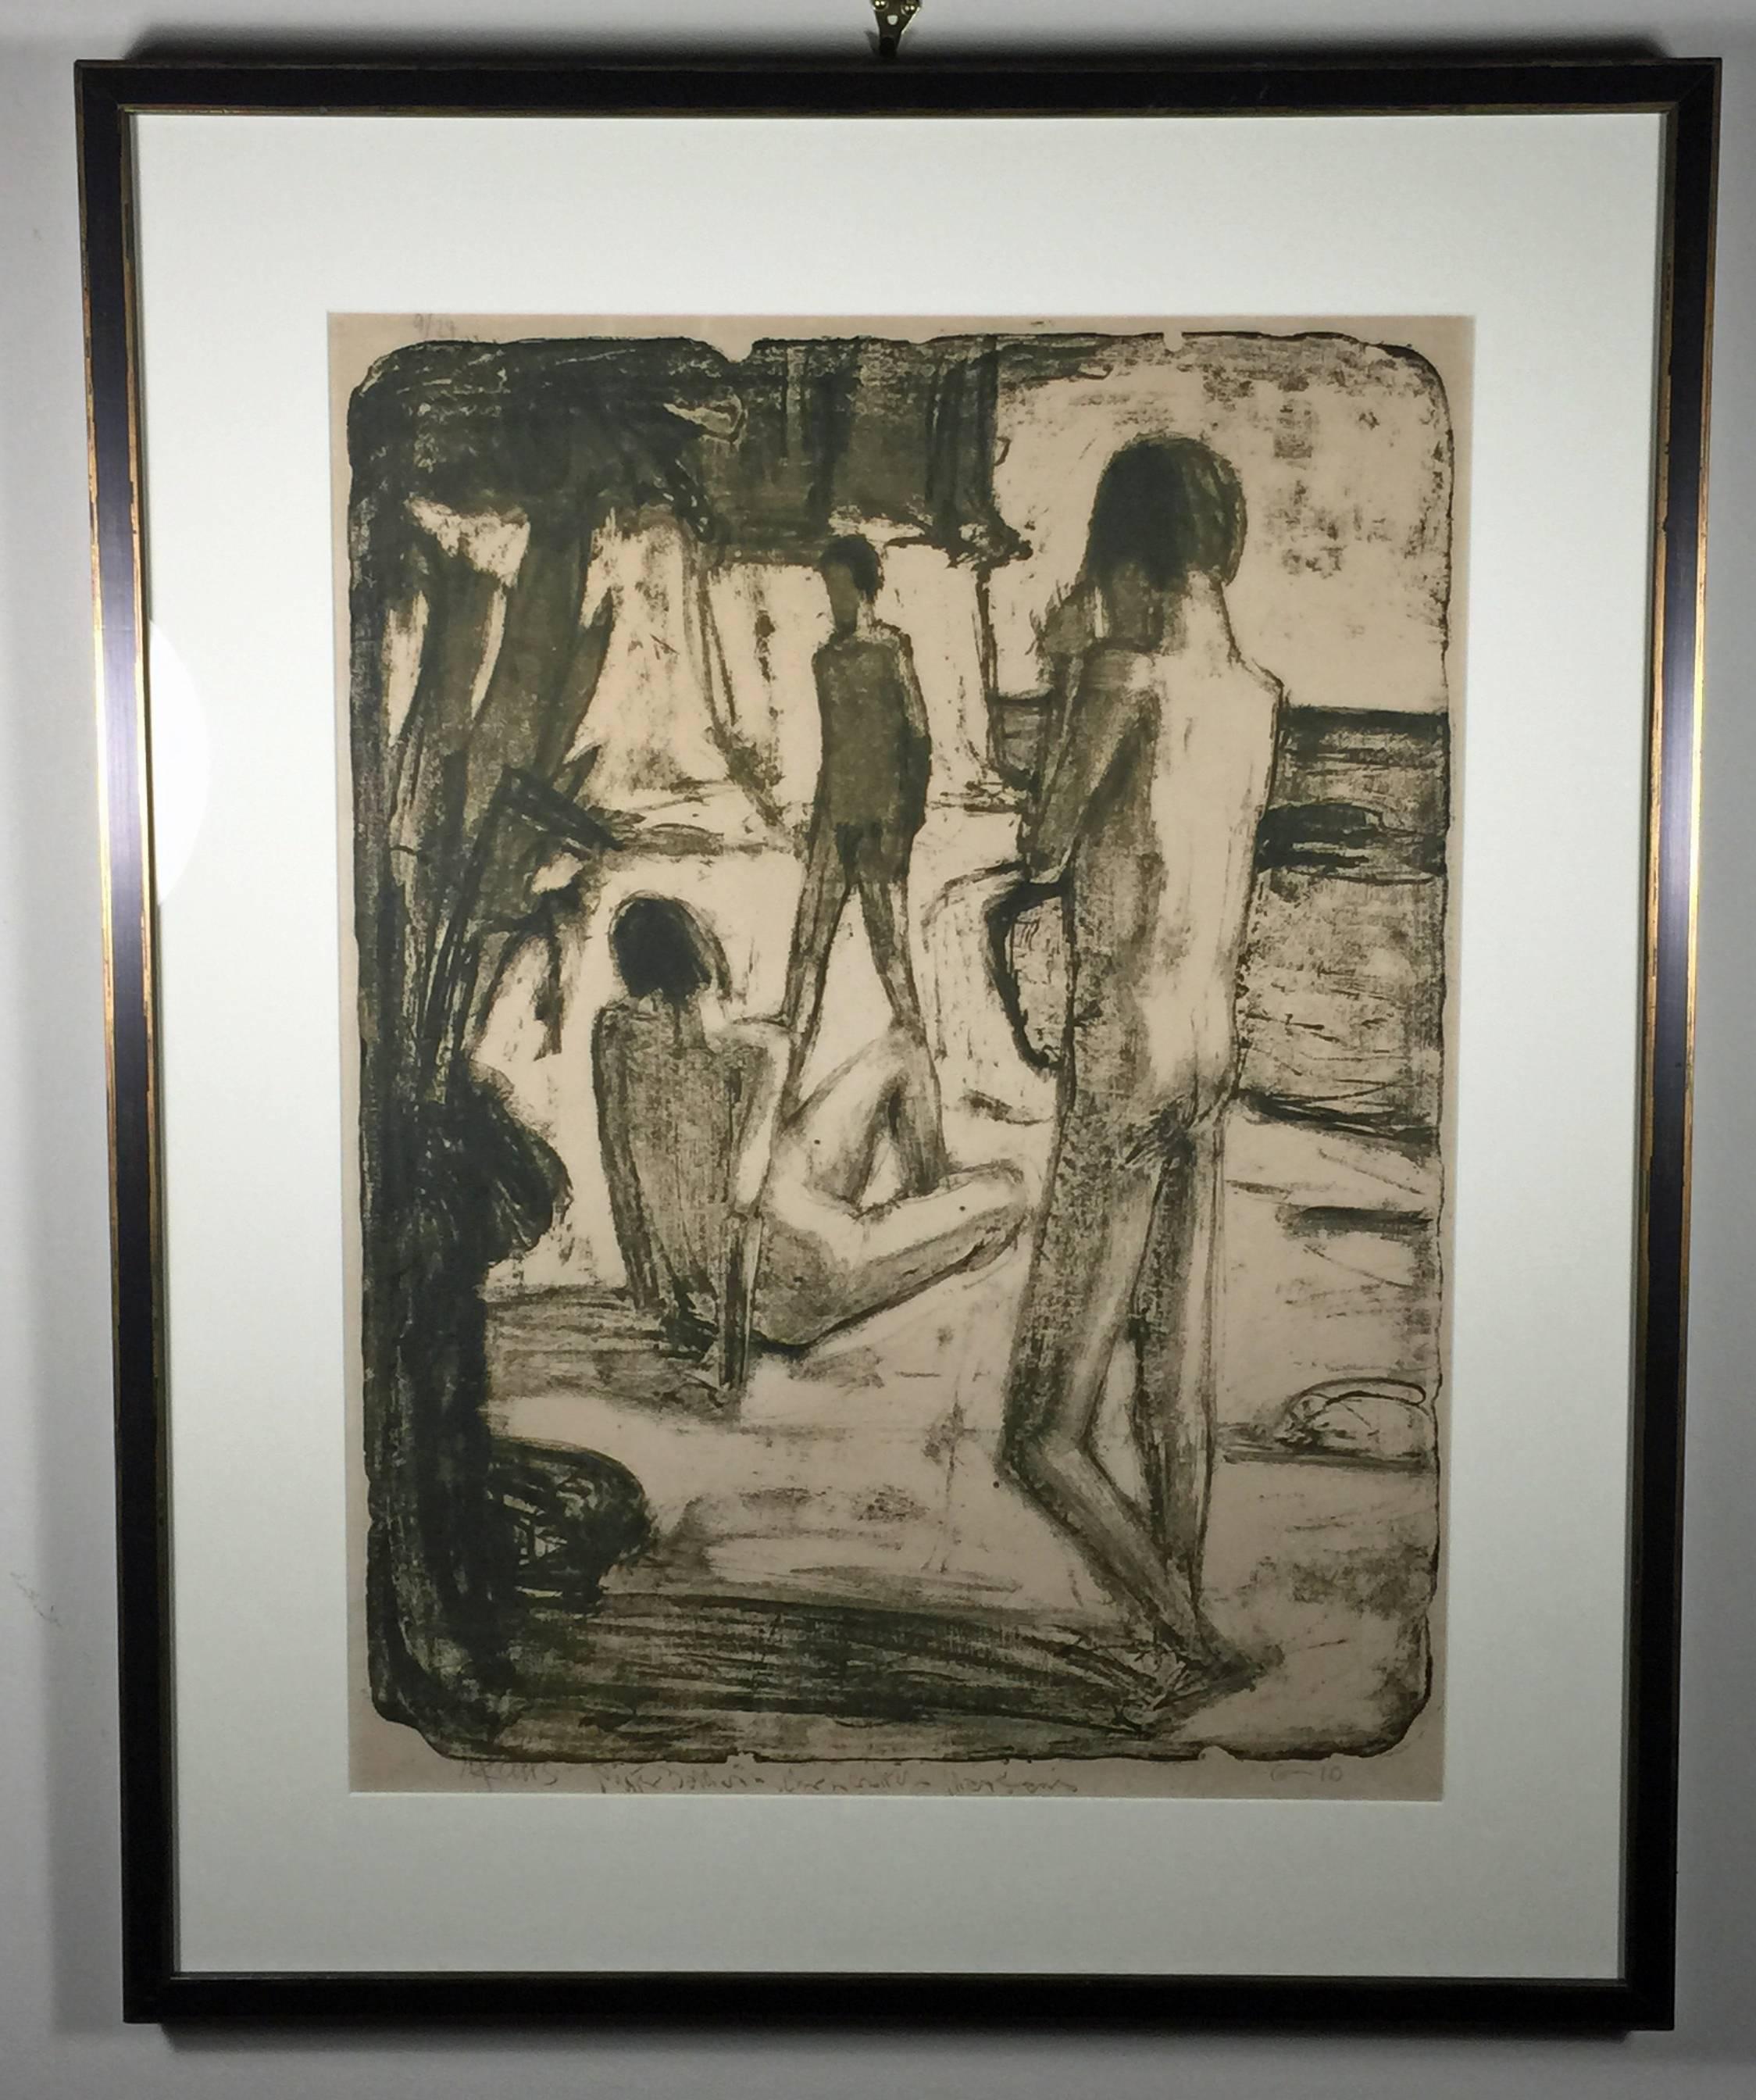 BADENDE MANNER: (THREE MALE BATHERS AT THE SHORE) - Print by Max Kaus